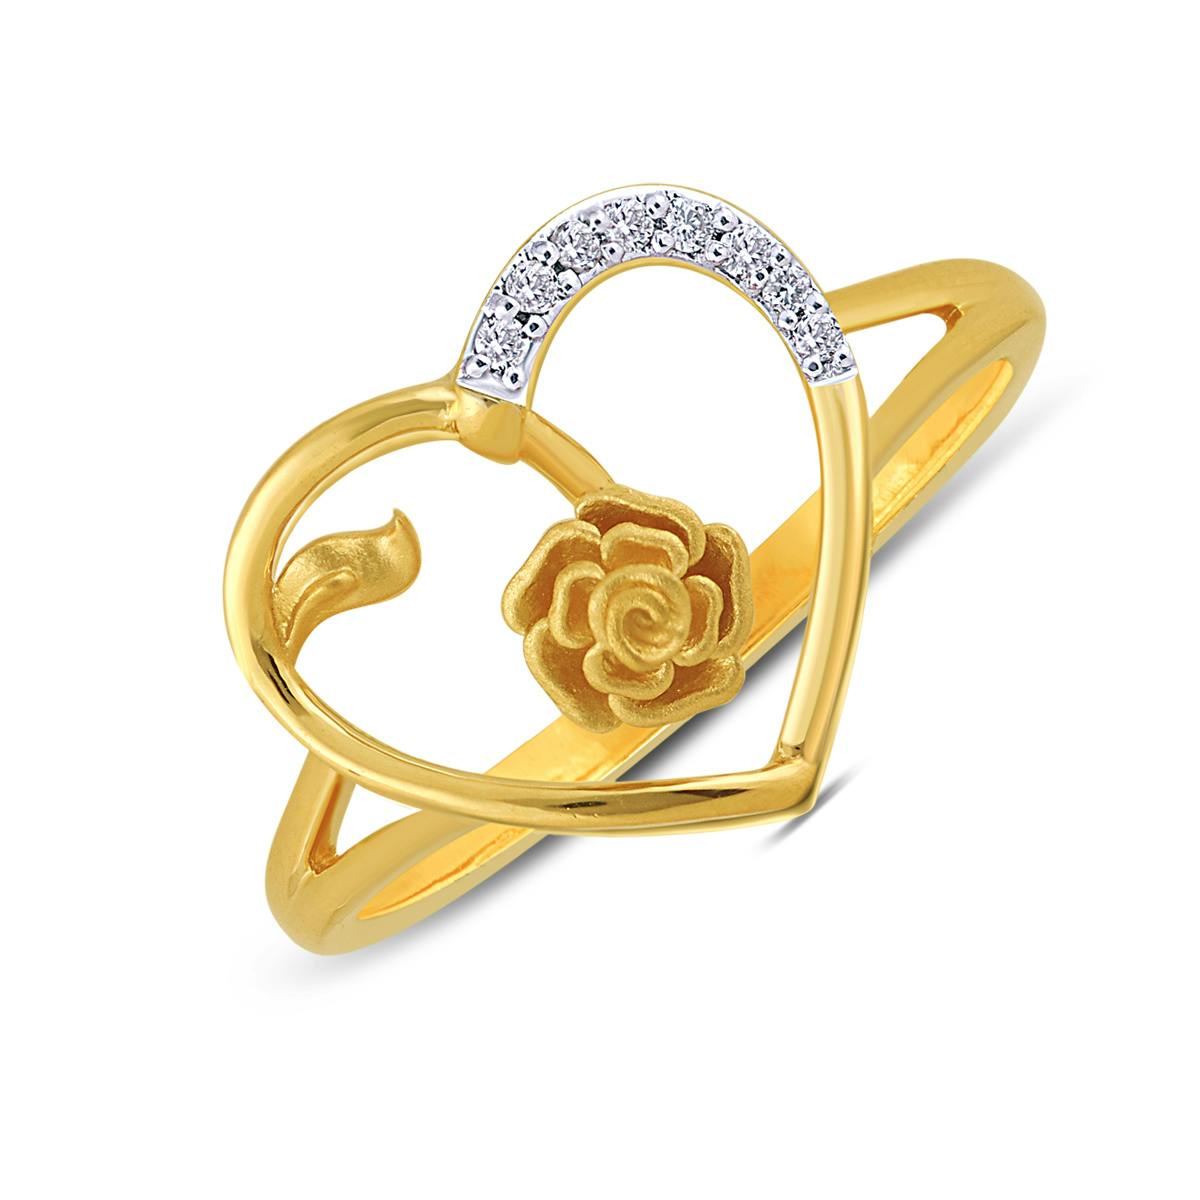 Heartly desire ring